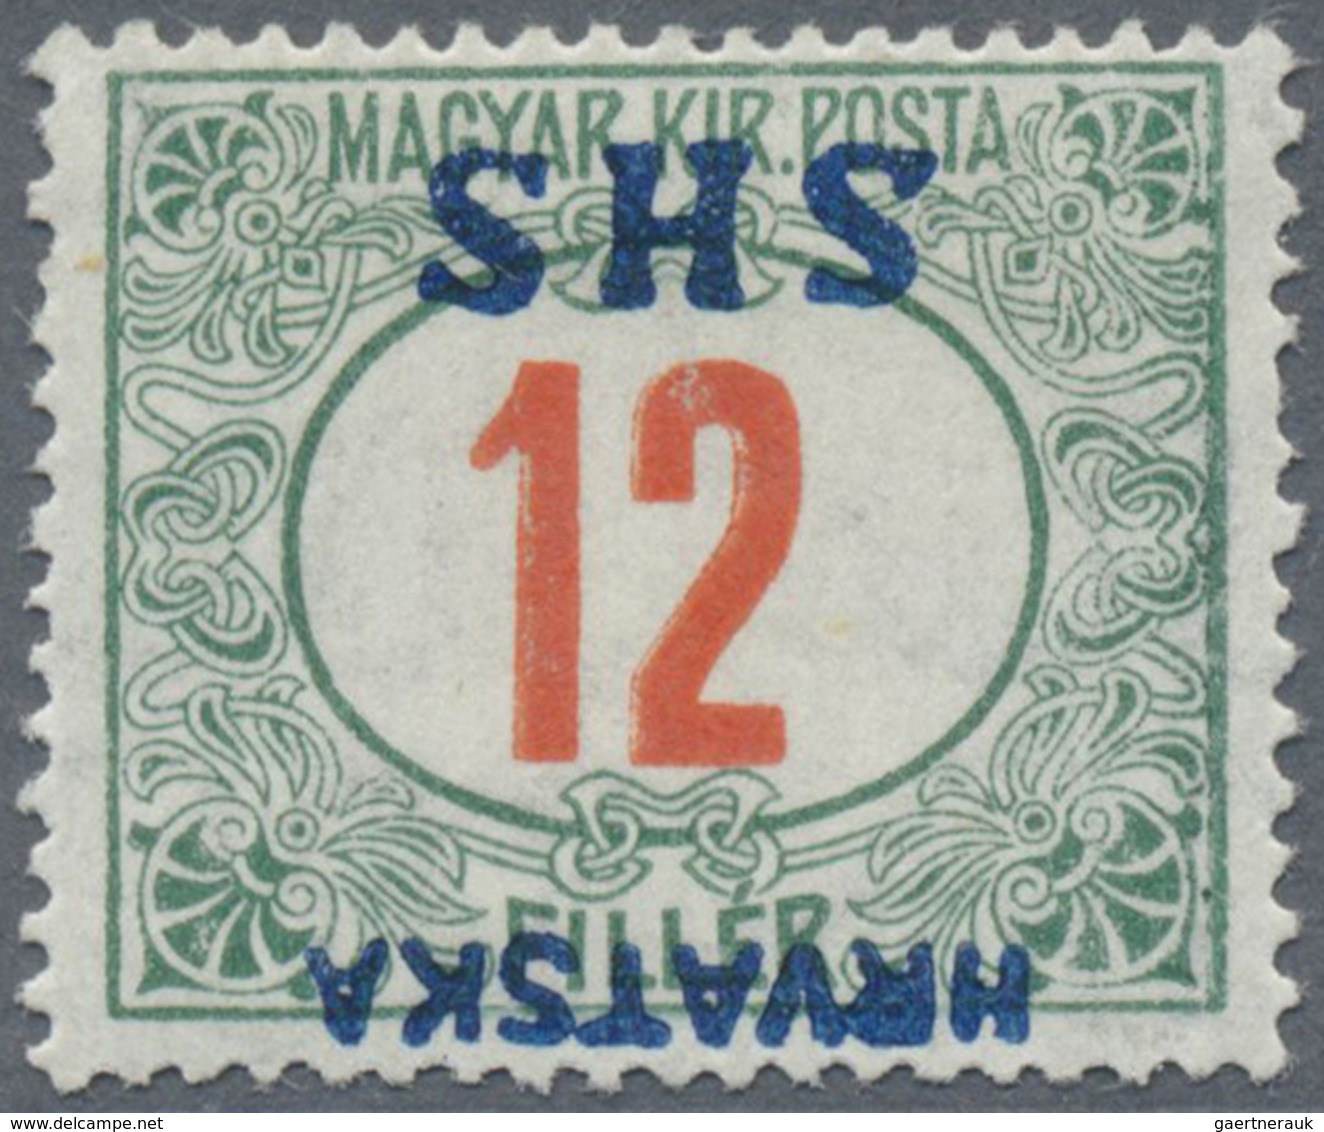 * Jugoslawien - Portomarken: 1918, Postage Due Stamp 12 F Of Hungary With INVERTED Overprint "HRVATSKA - Timbres-taxe